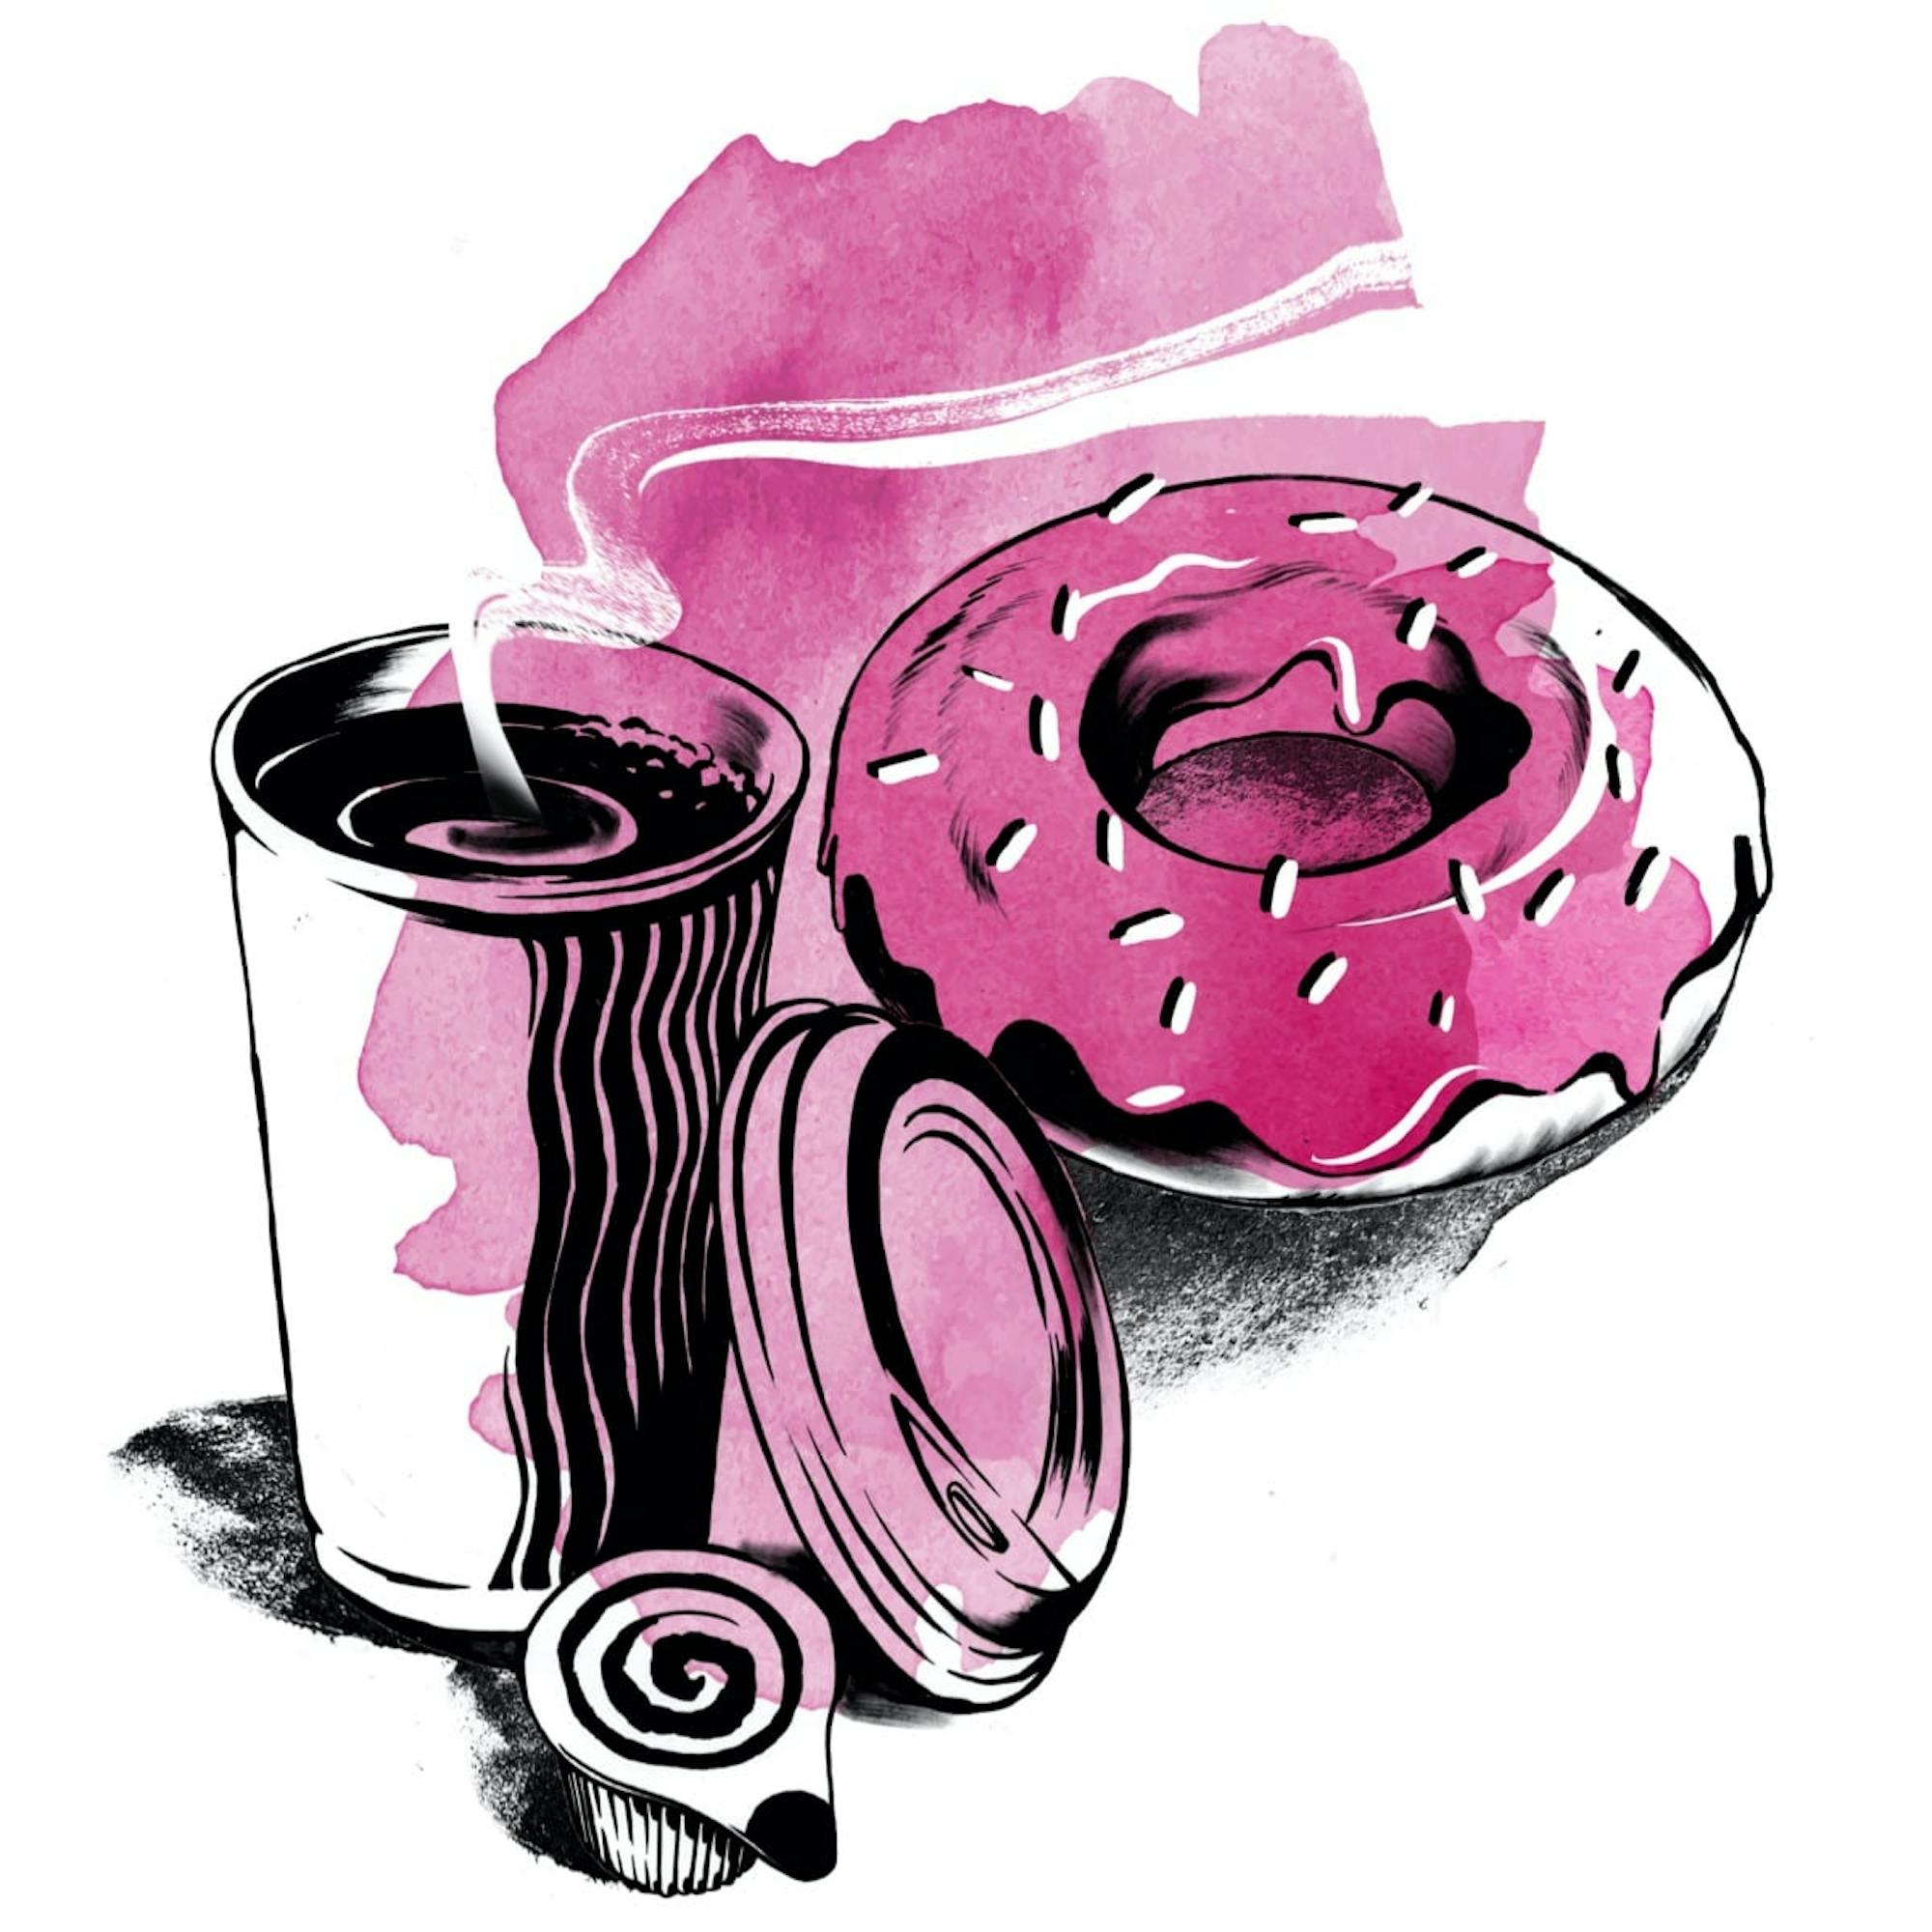 A watercolor illustration of some of Ariana’s favorite items from craft services: a steaming coffee cup and a donut with sprinkles. Shout-out to crafty!